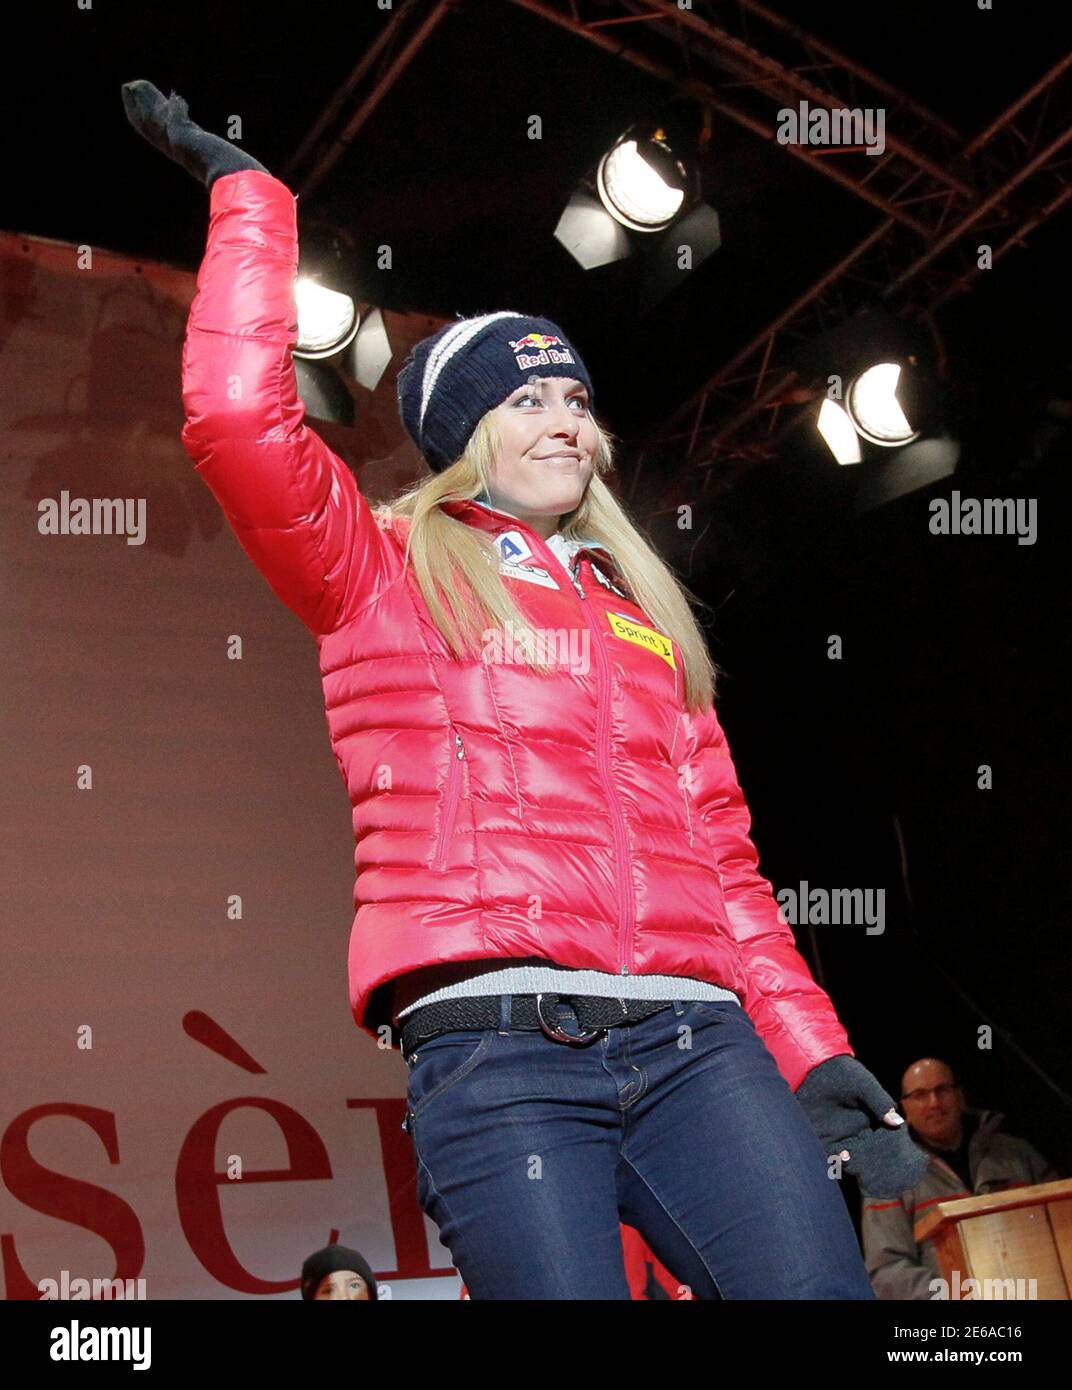 Lindsey Vonn of the U.S. reacts during the draw of the Women's World Cup  Downhill skiing race in Val d'Isere, French Alps, December 20, 2013.  Olympic downhill champion Lindsey Vonn, one of